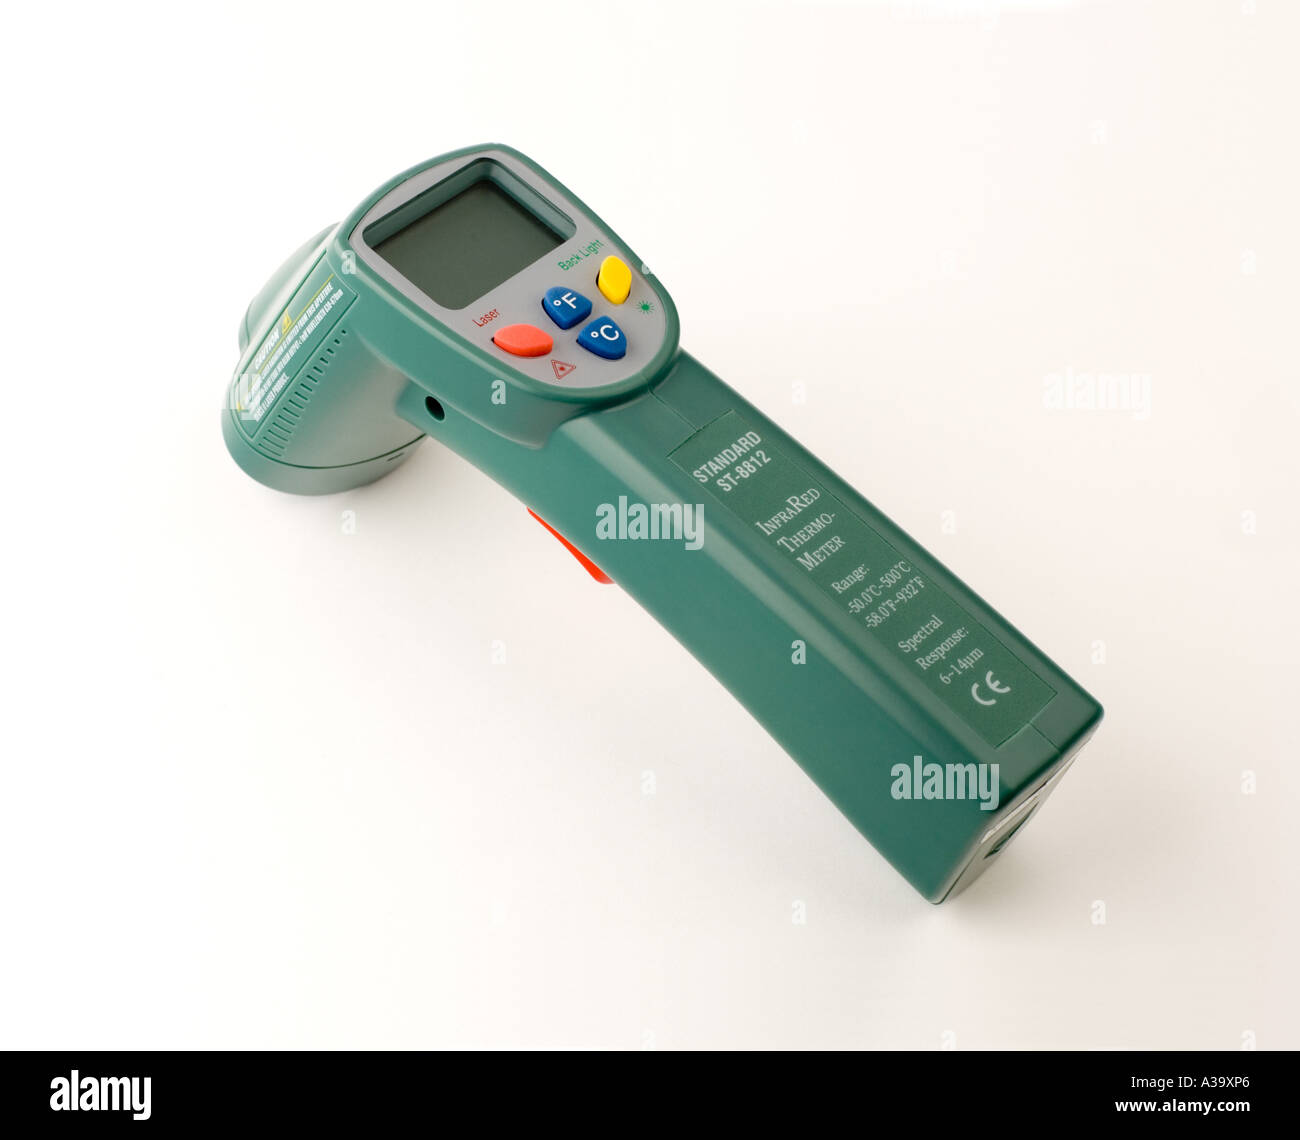 infra red thermometer Stock Photo